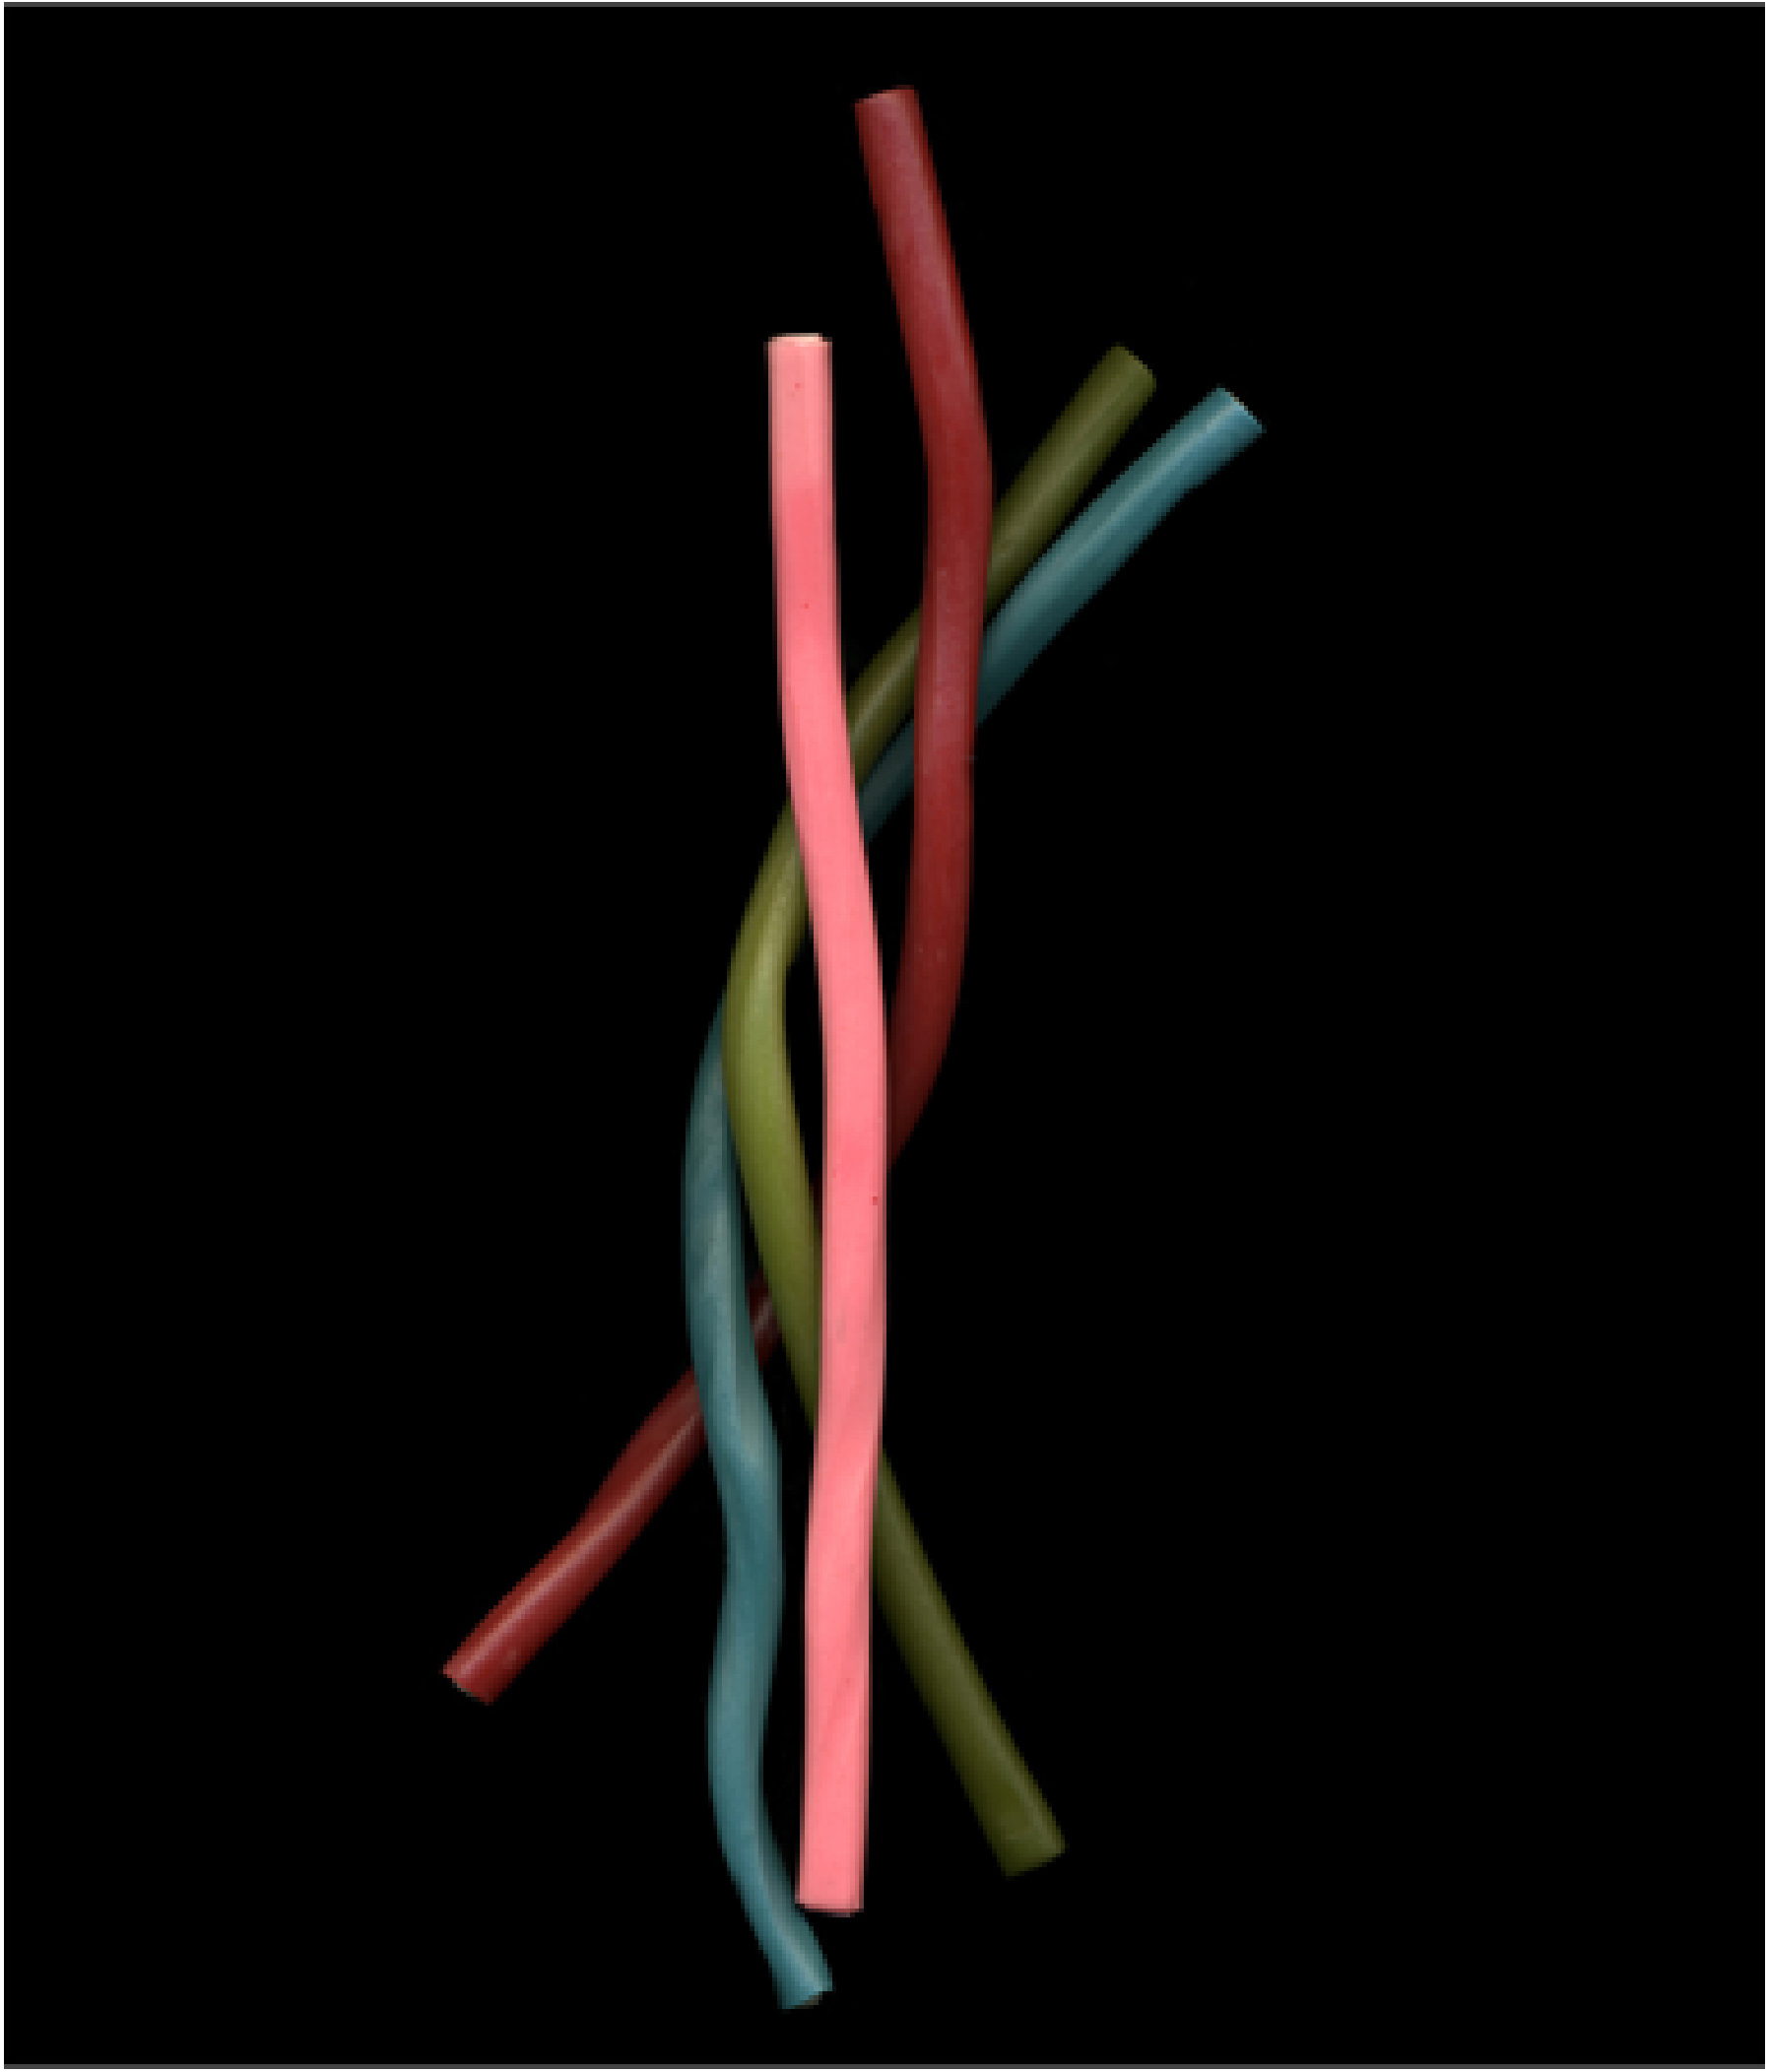 Colored Strings